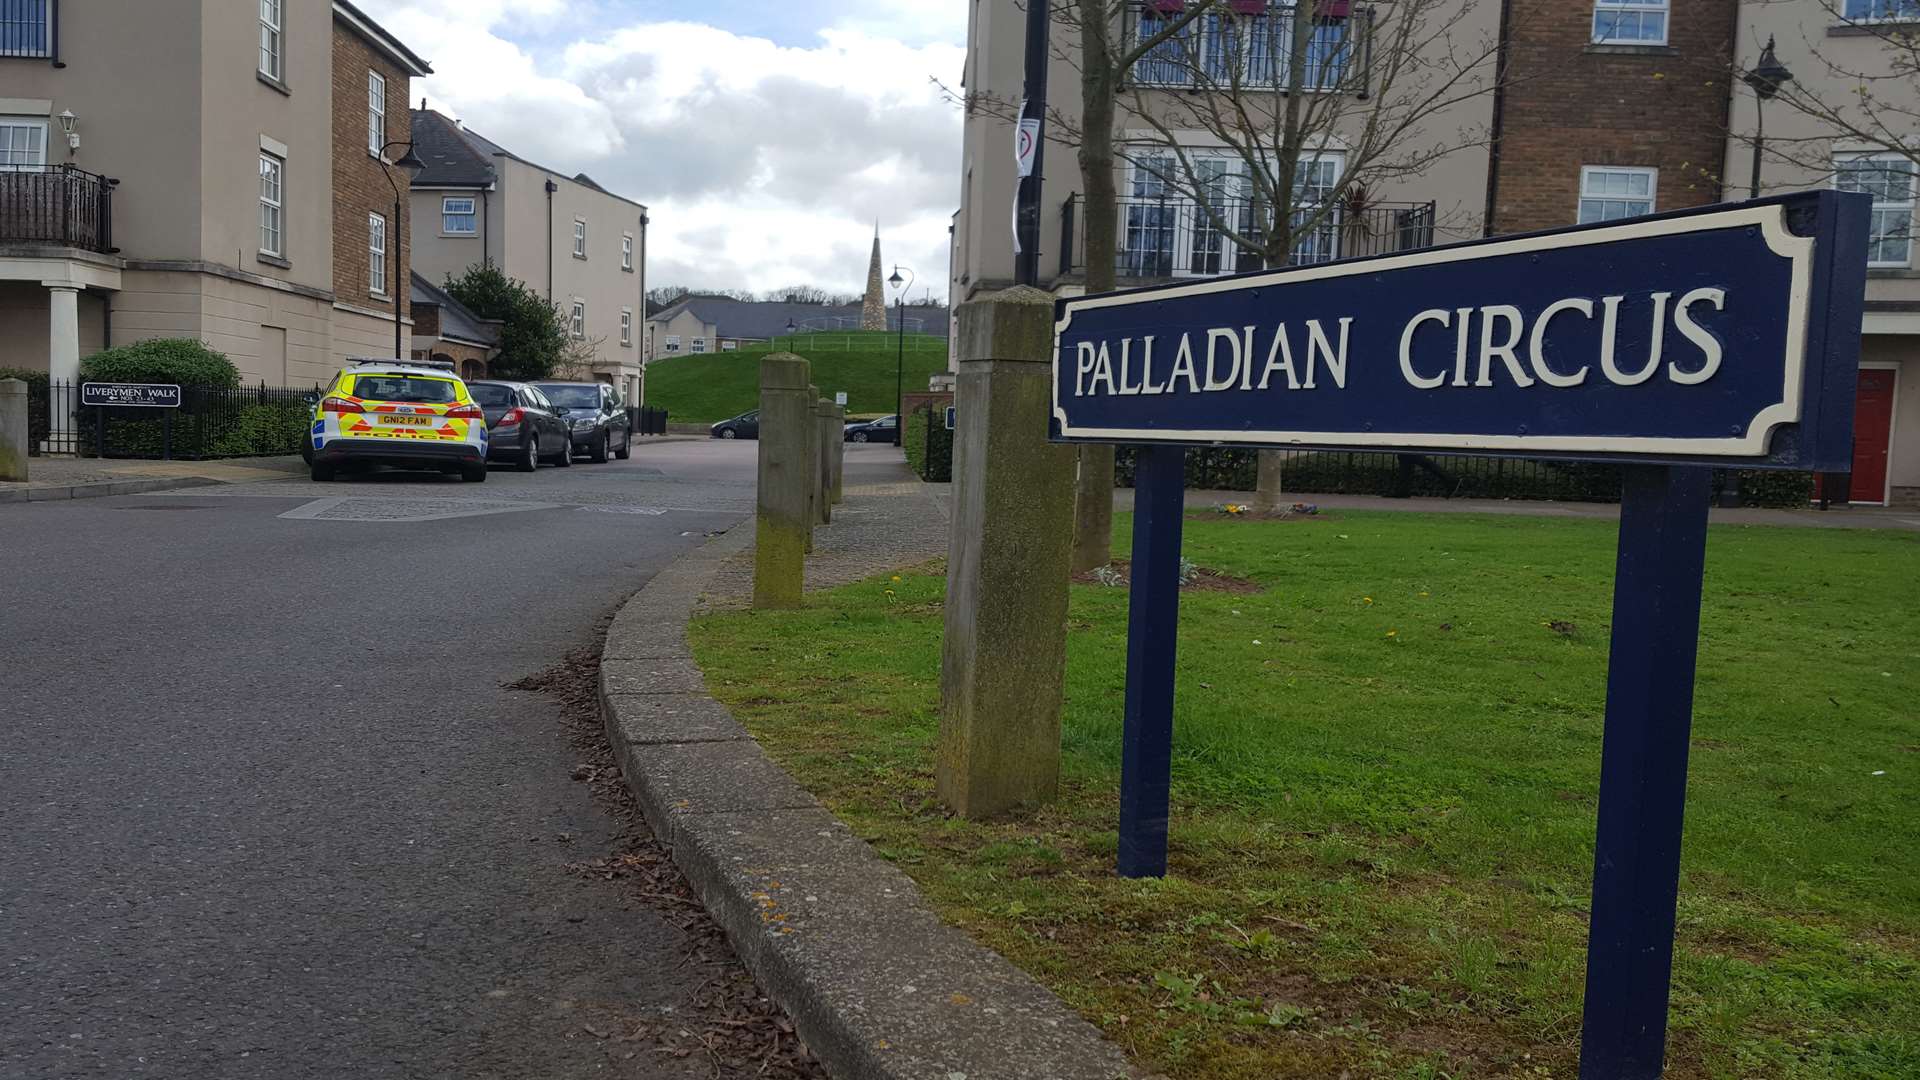 Police were called to the Palladian Circus area of Greenhithe